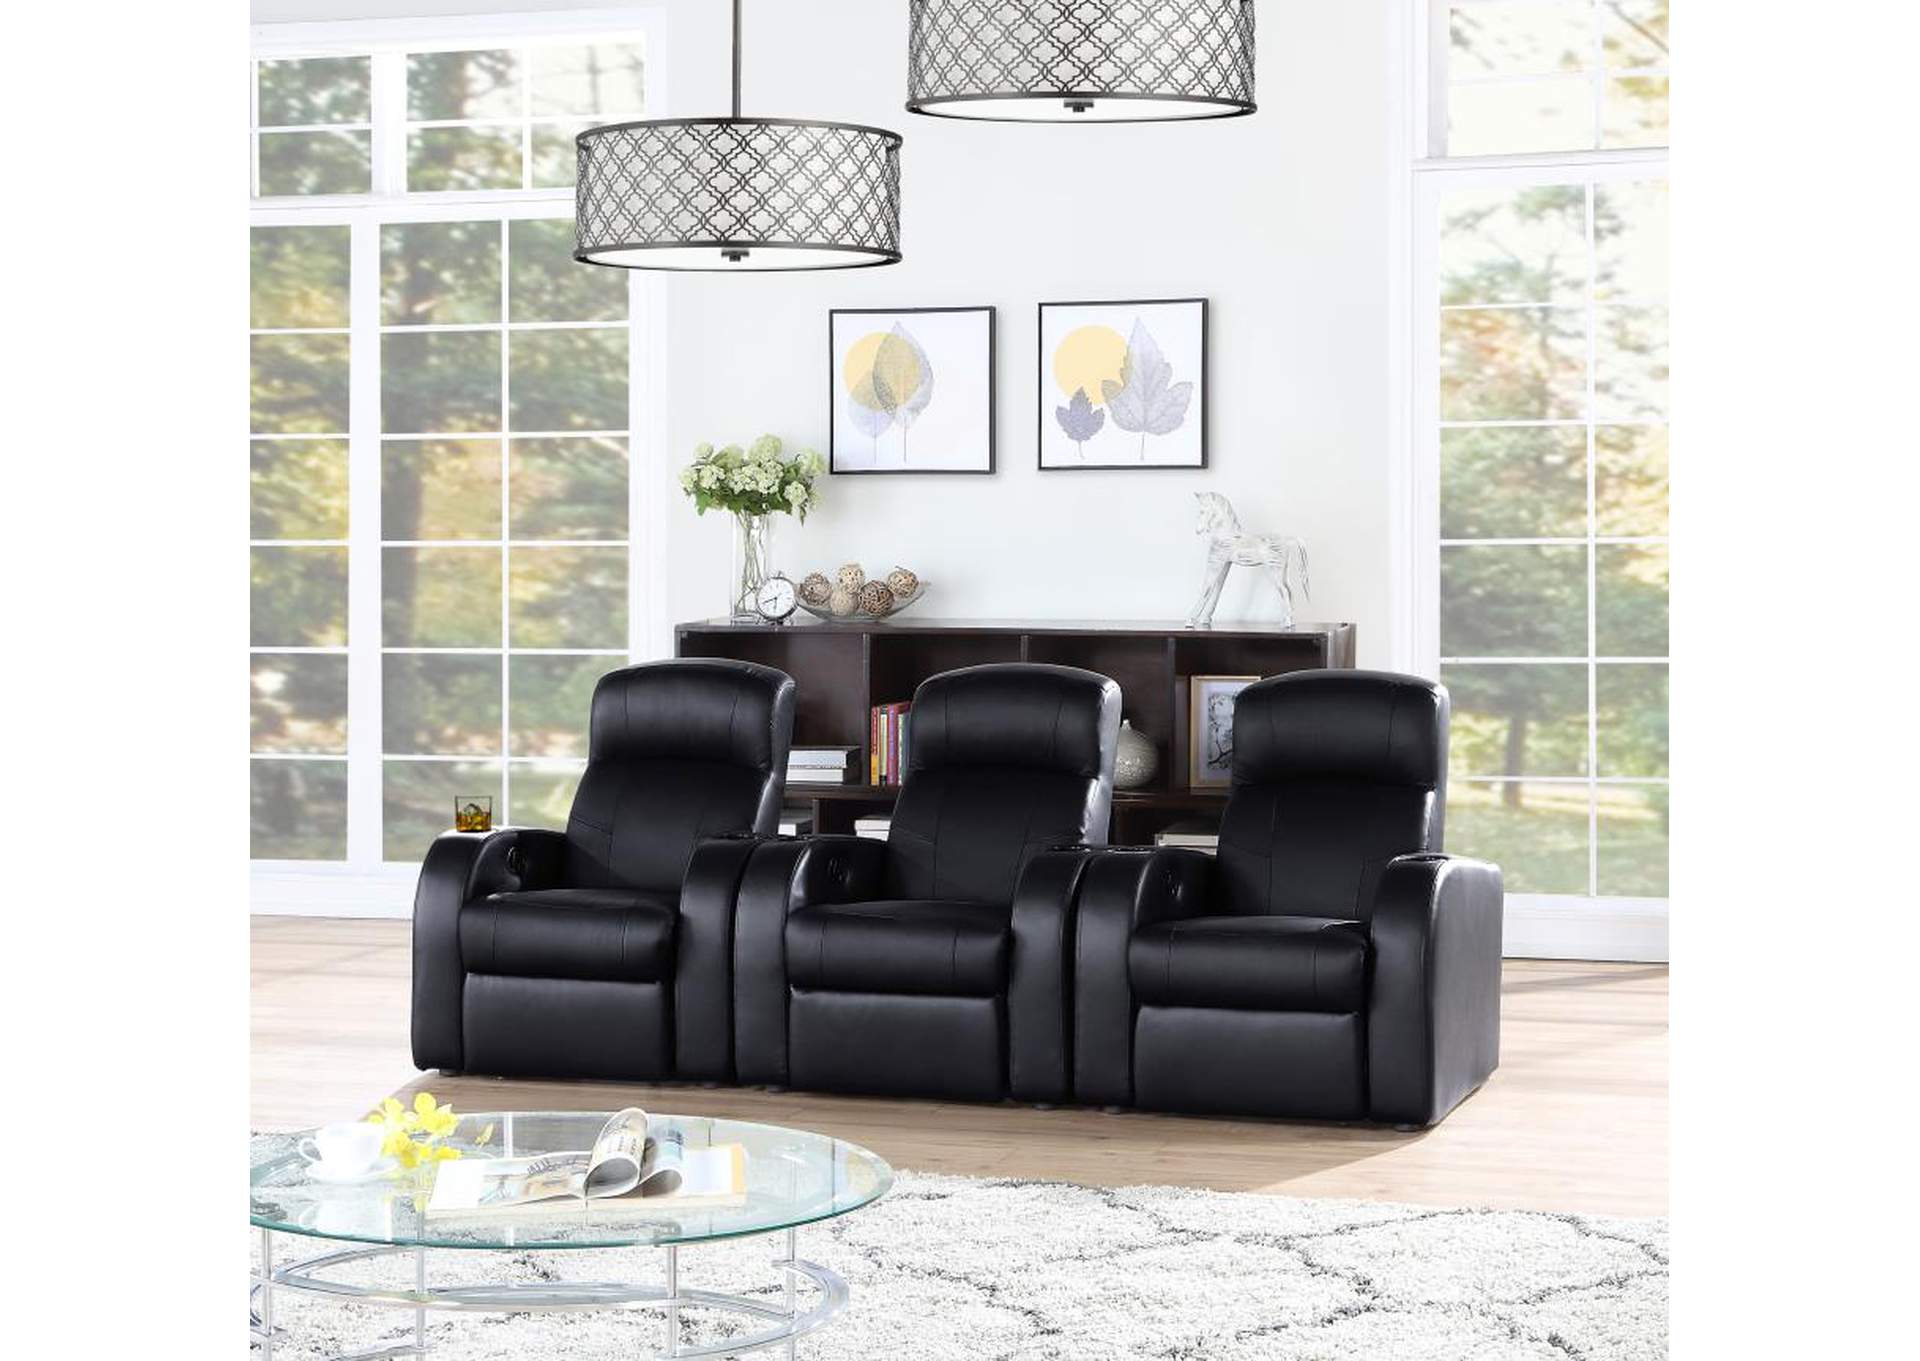 Cyrus Home Theater Upholstered Console Black,Coaster Furniture